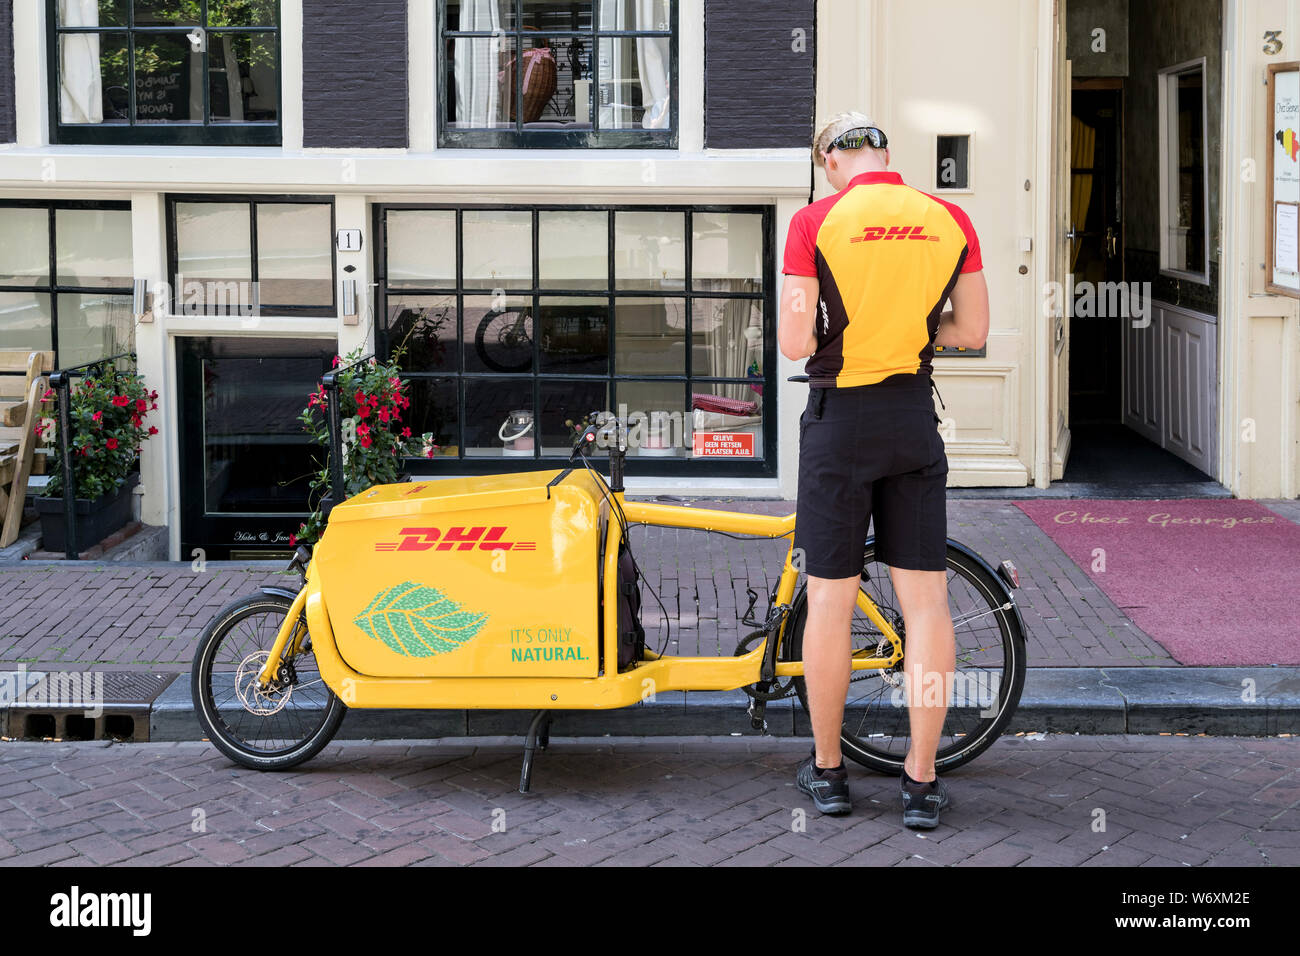 DHL courier with freight bicycle. DHL is a division of the German logistics company Deutsche Post AG providing international express mail services. Stock Photo